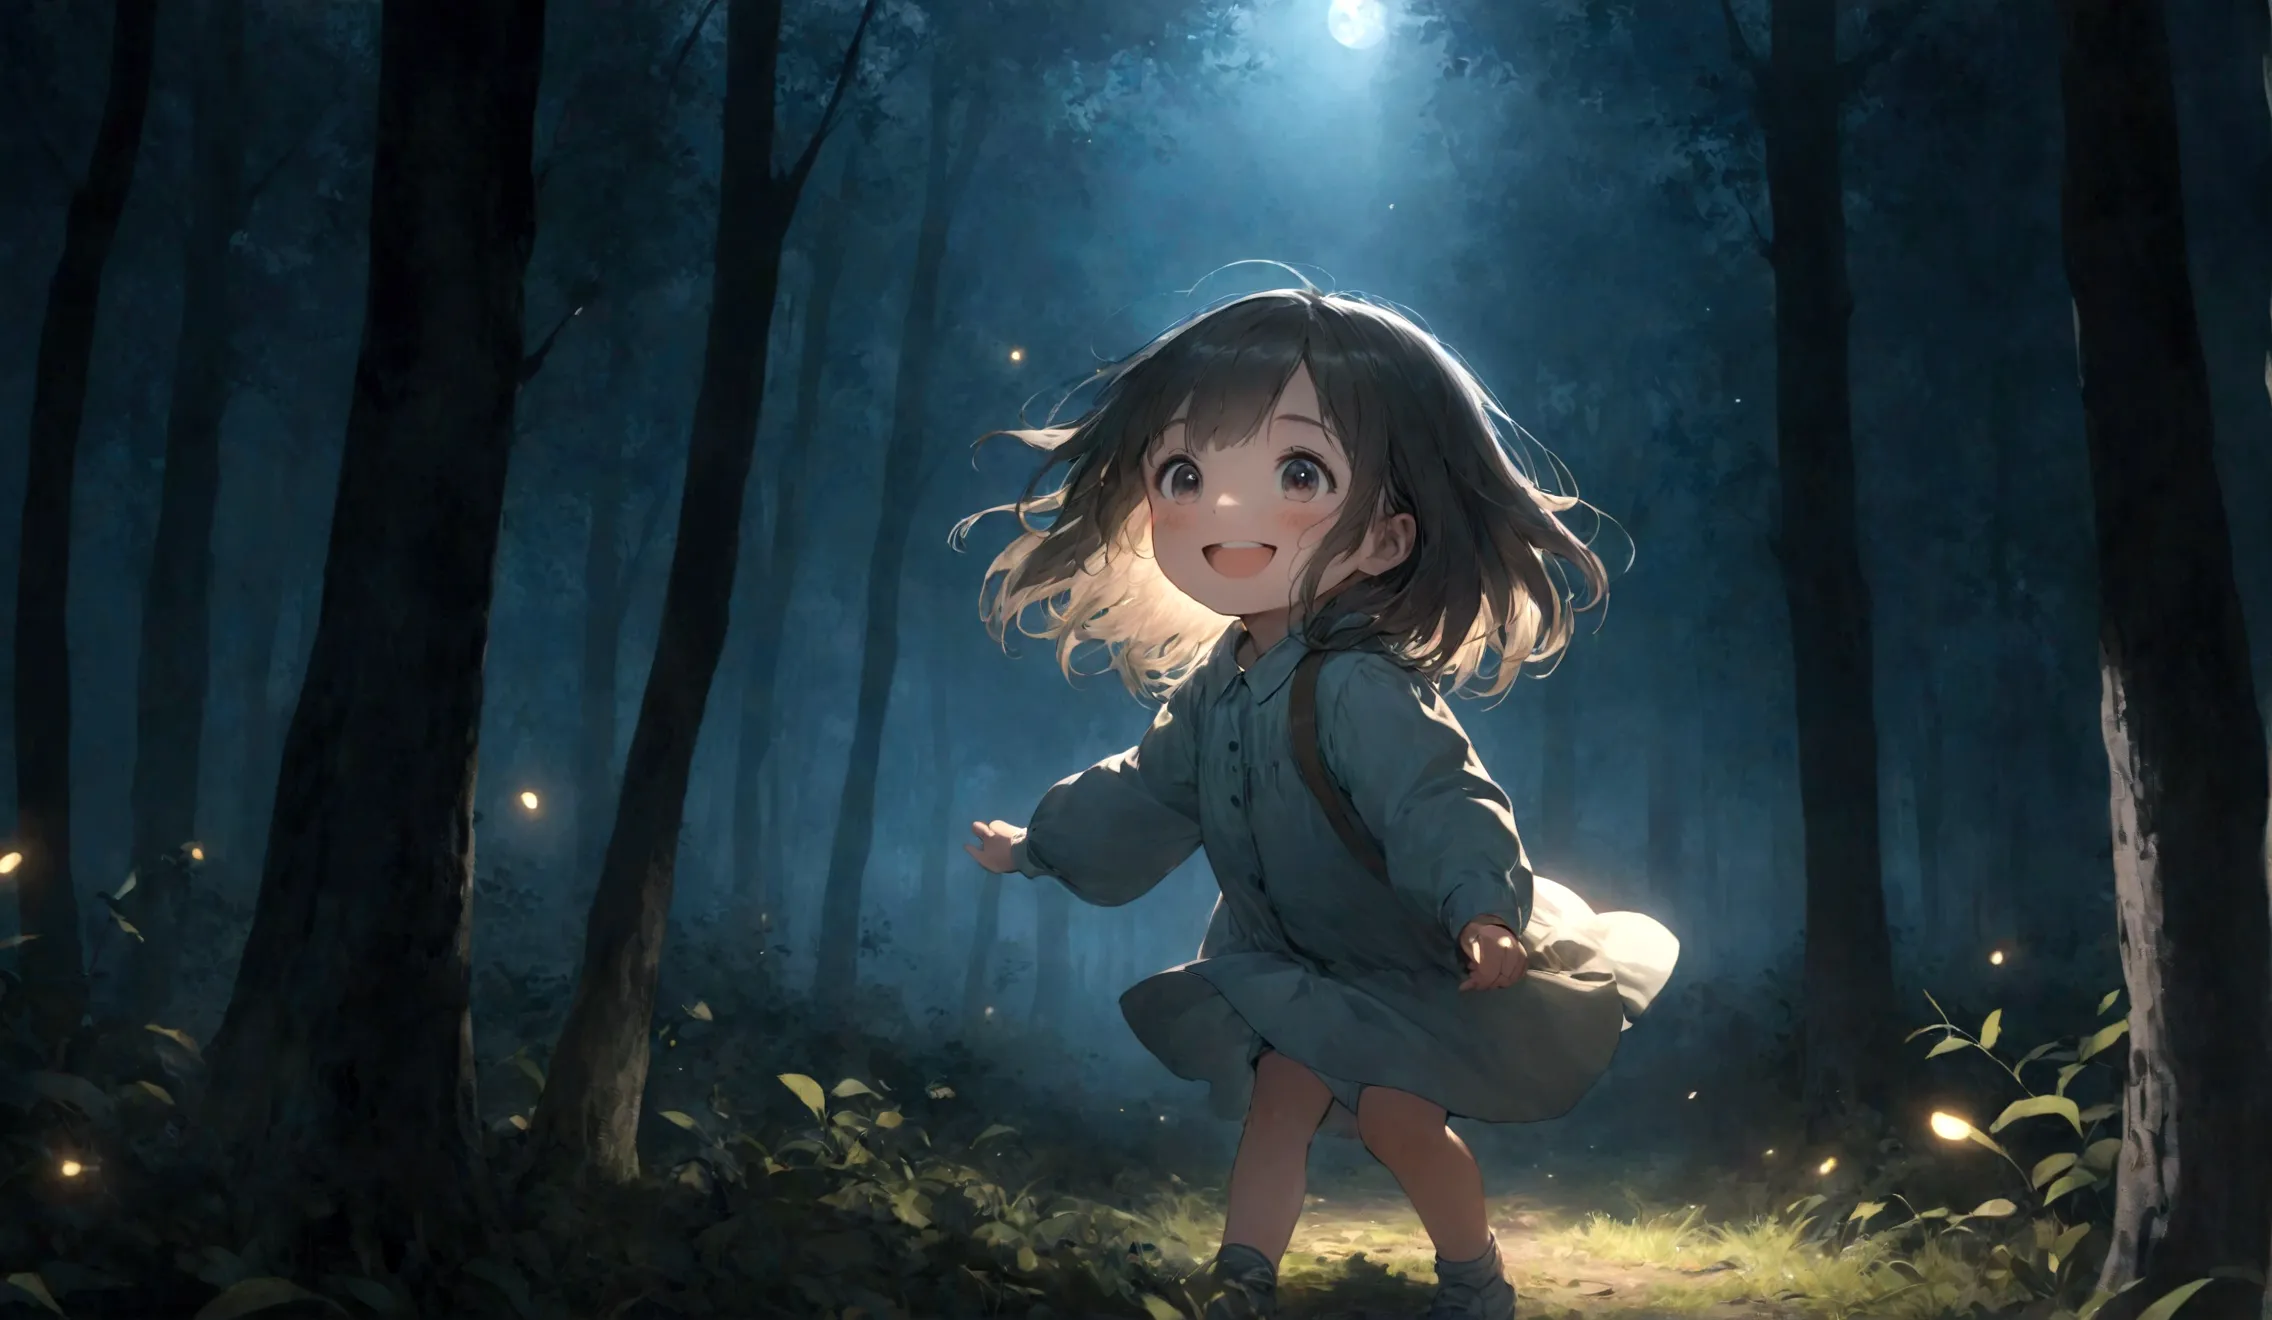 A small girl playing in the dark woods looking happy and smiling